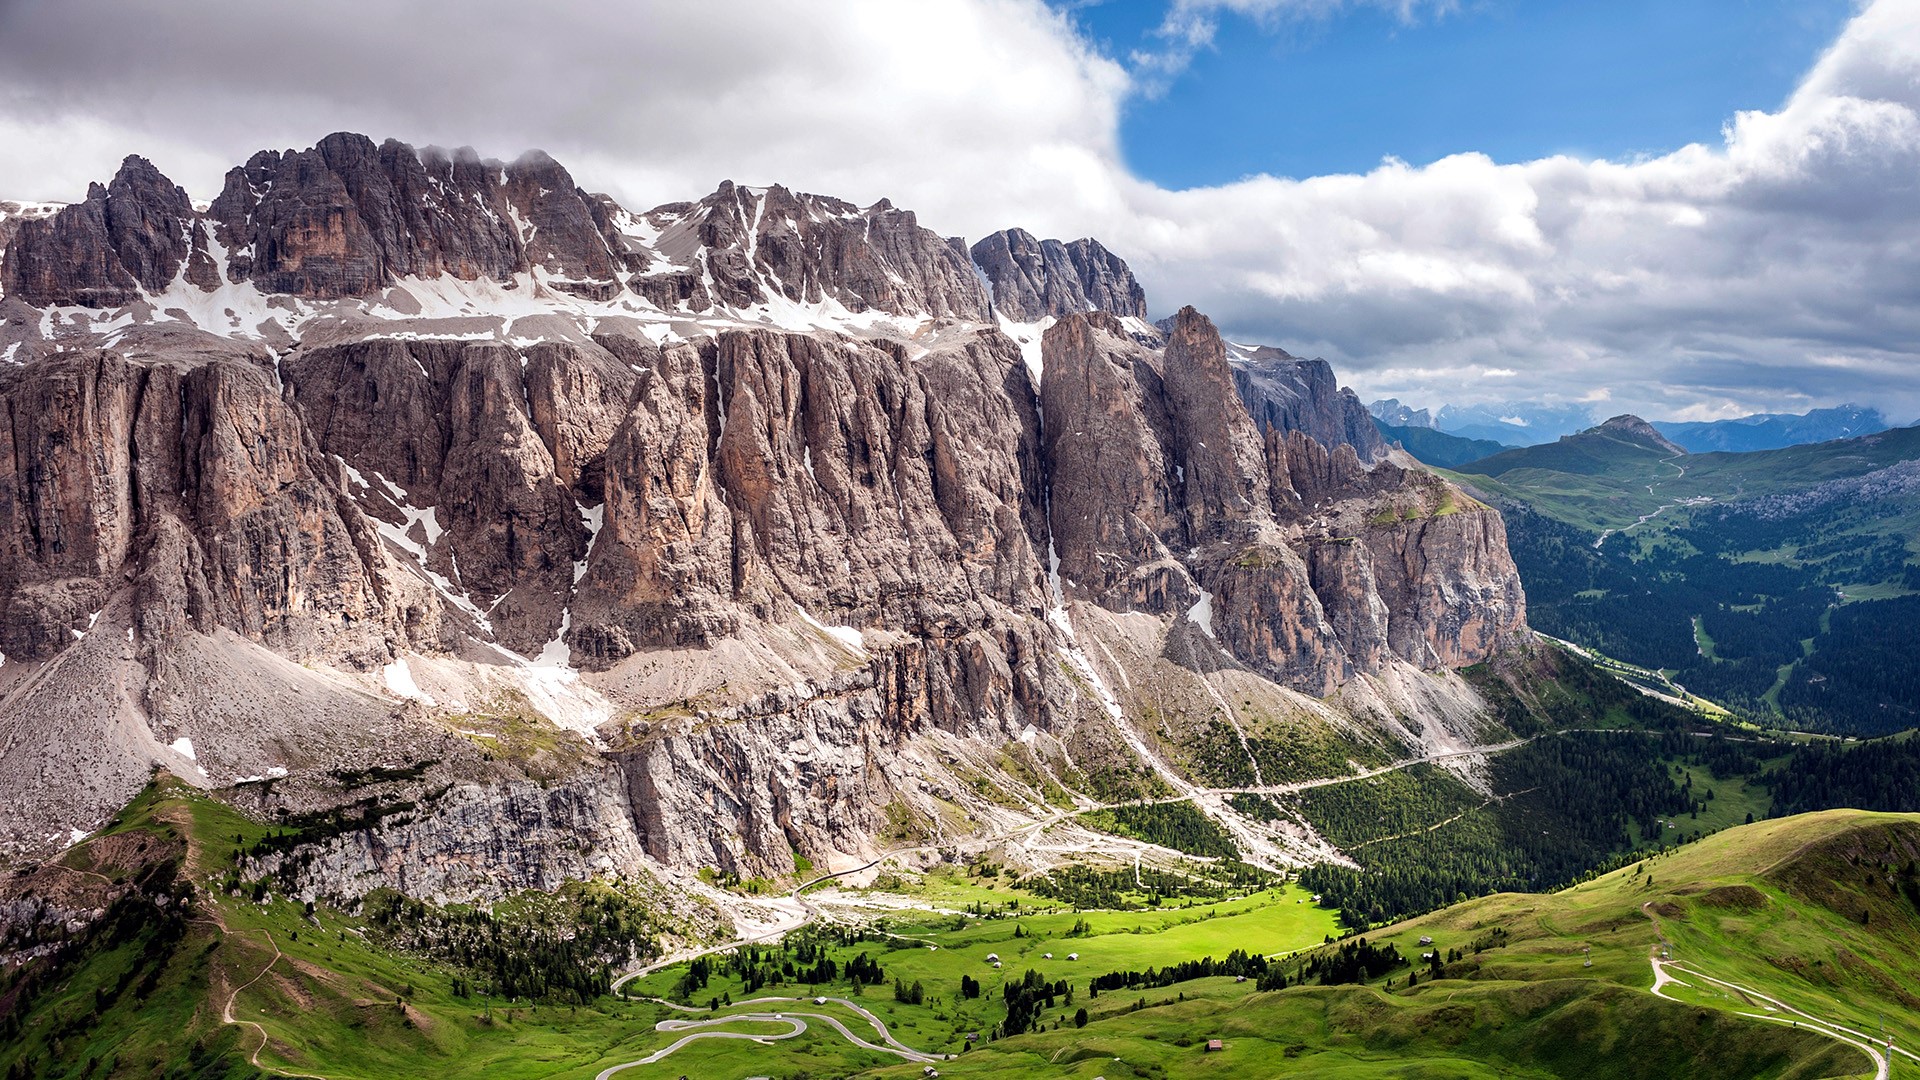 General 1920x1080 nature landscape sky clouds trees forest road hairpin turns rocks snowy mountain aerial view drone photo Dolomites Italy